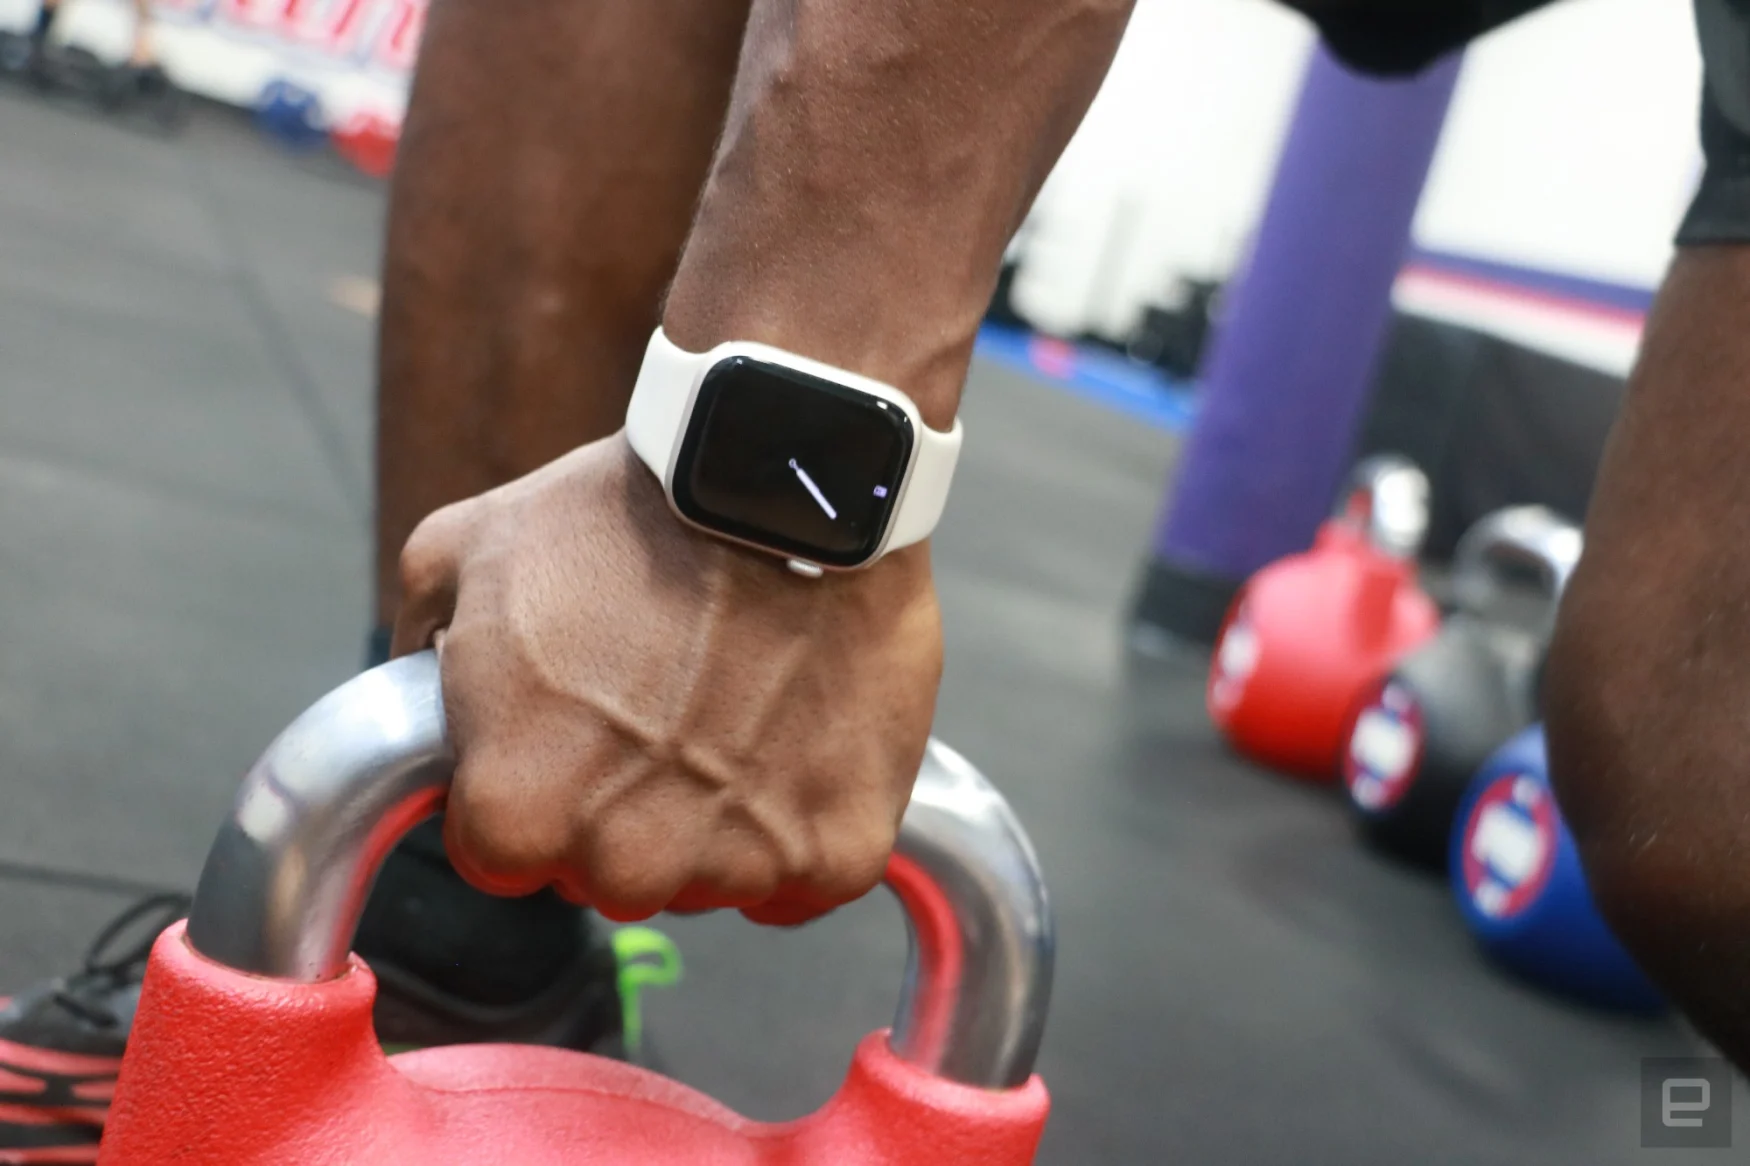 An Apple Watch Series 8 on the wrist of a person gripping a red kettlebell, showing its Always On Display.